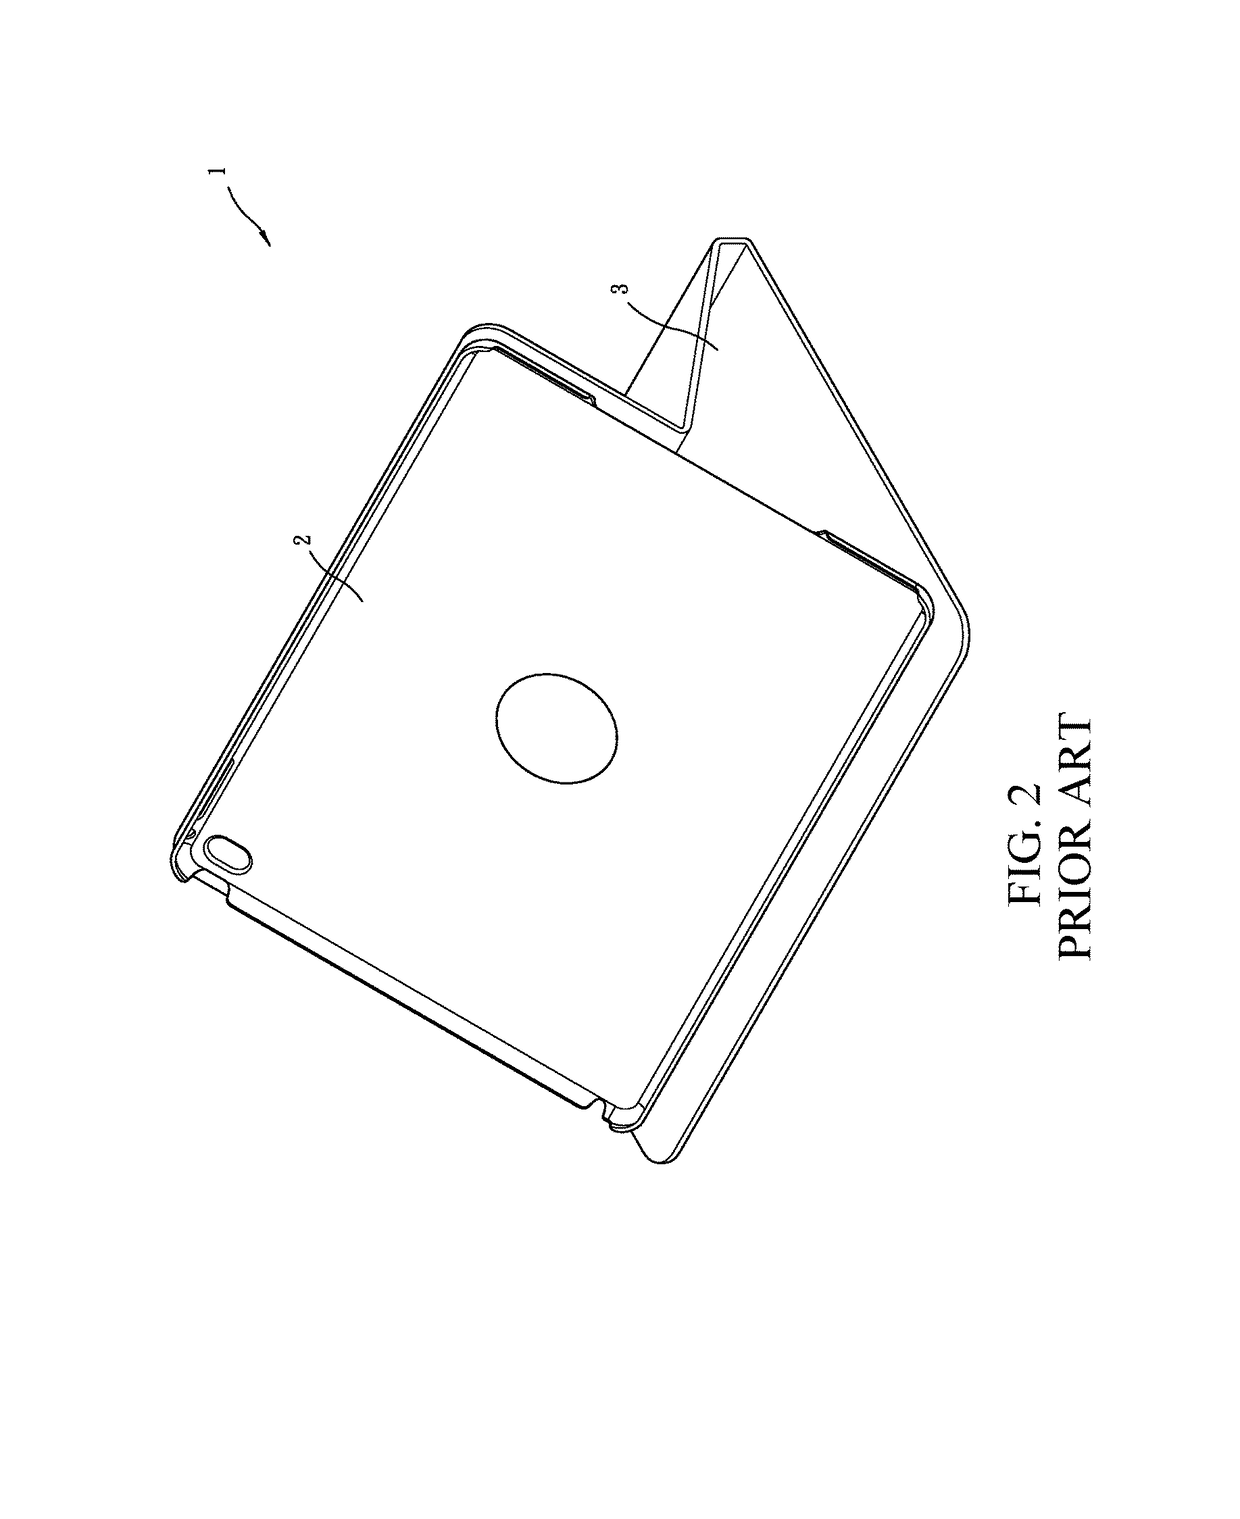 Protection enclosure of portable electronic device